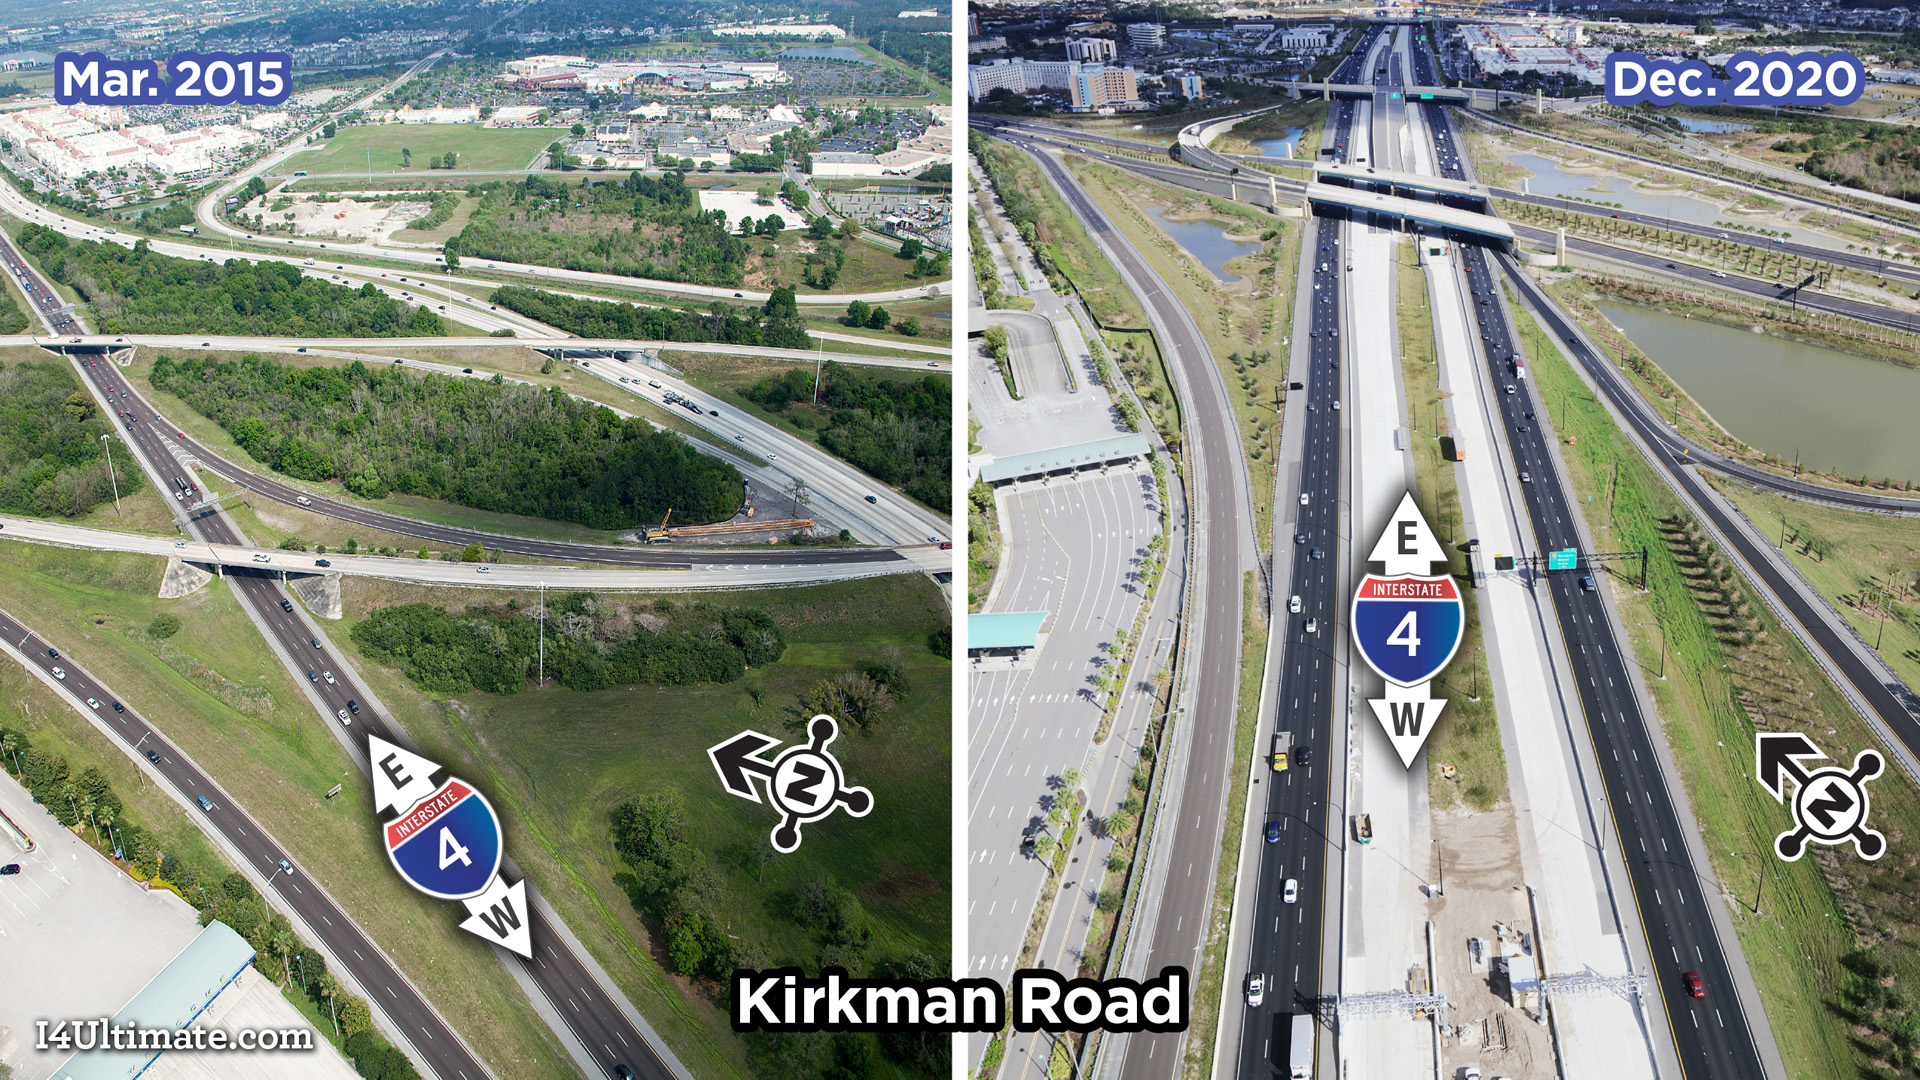 4738-I4Ultimate-GUL-campaign-images-20210212-02-Kirkman-Road